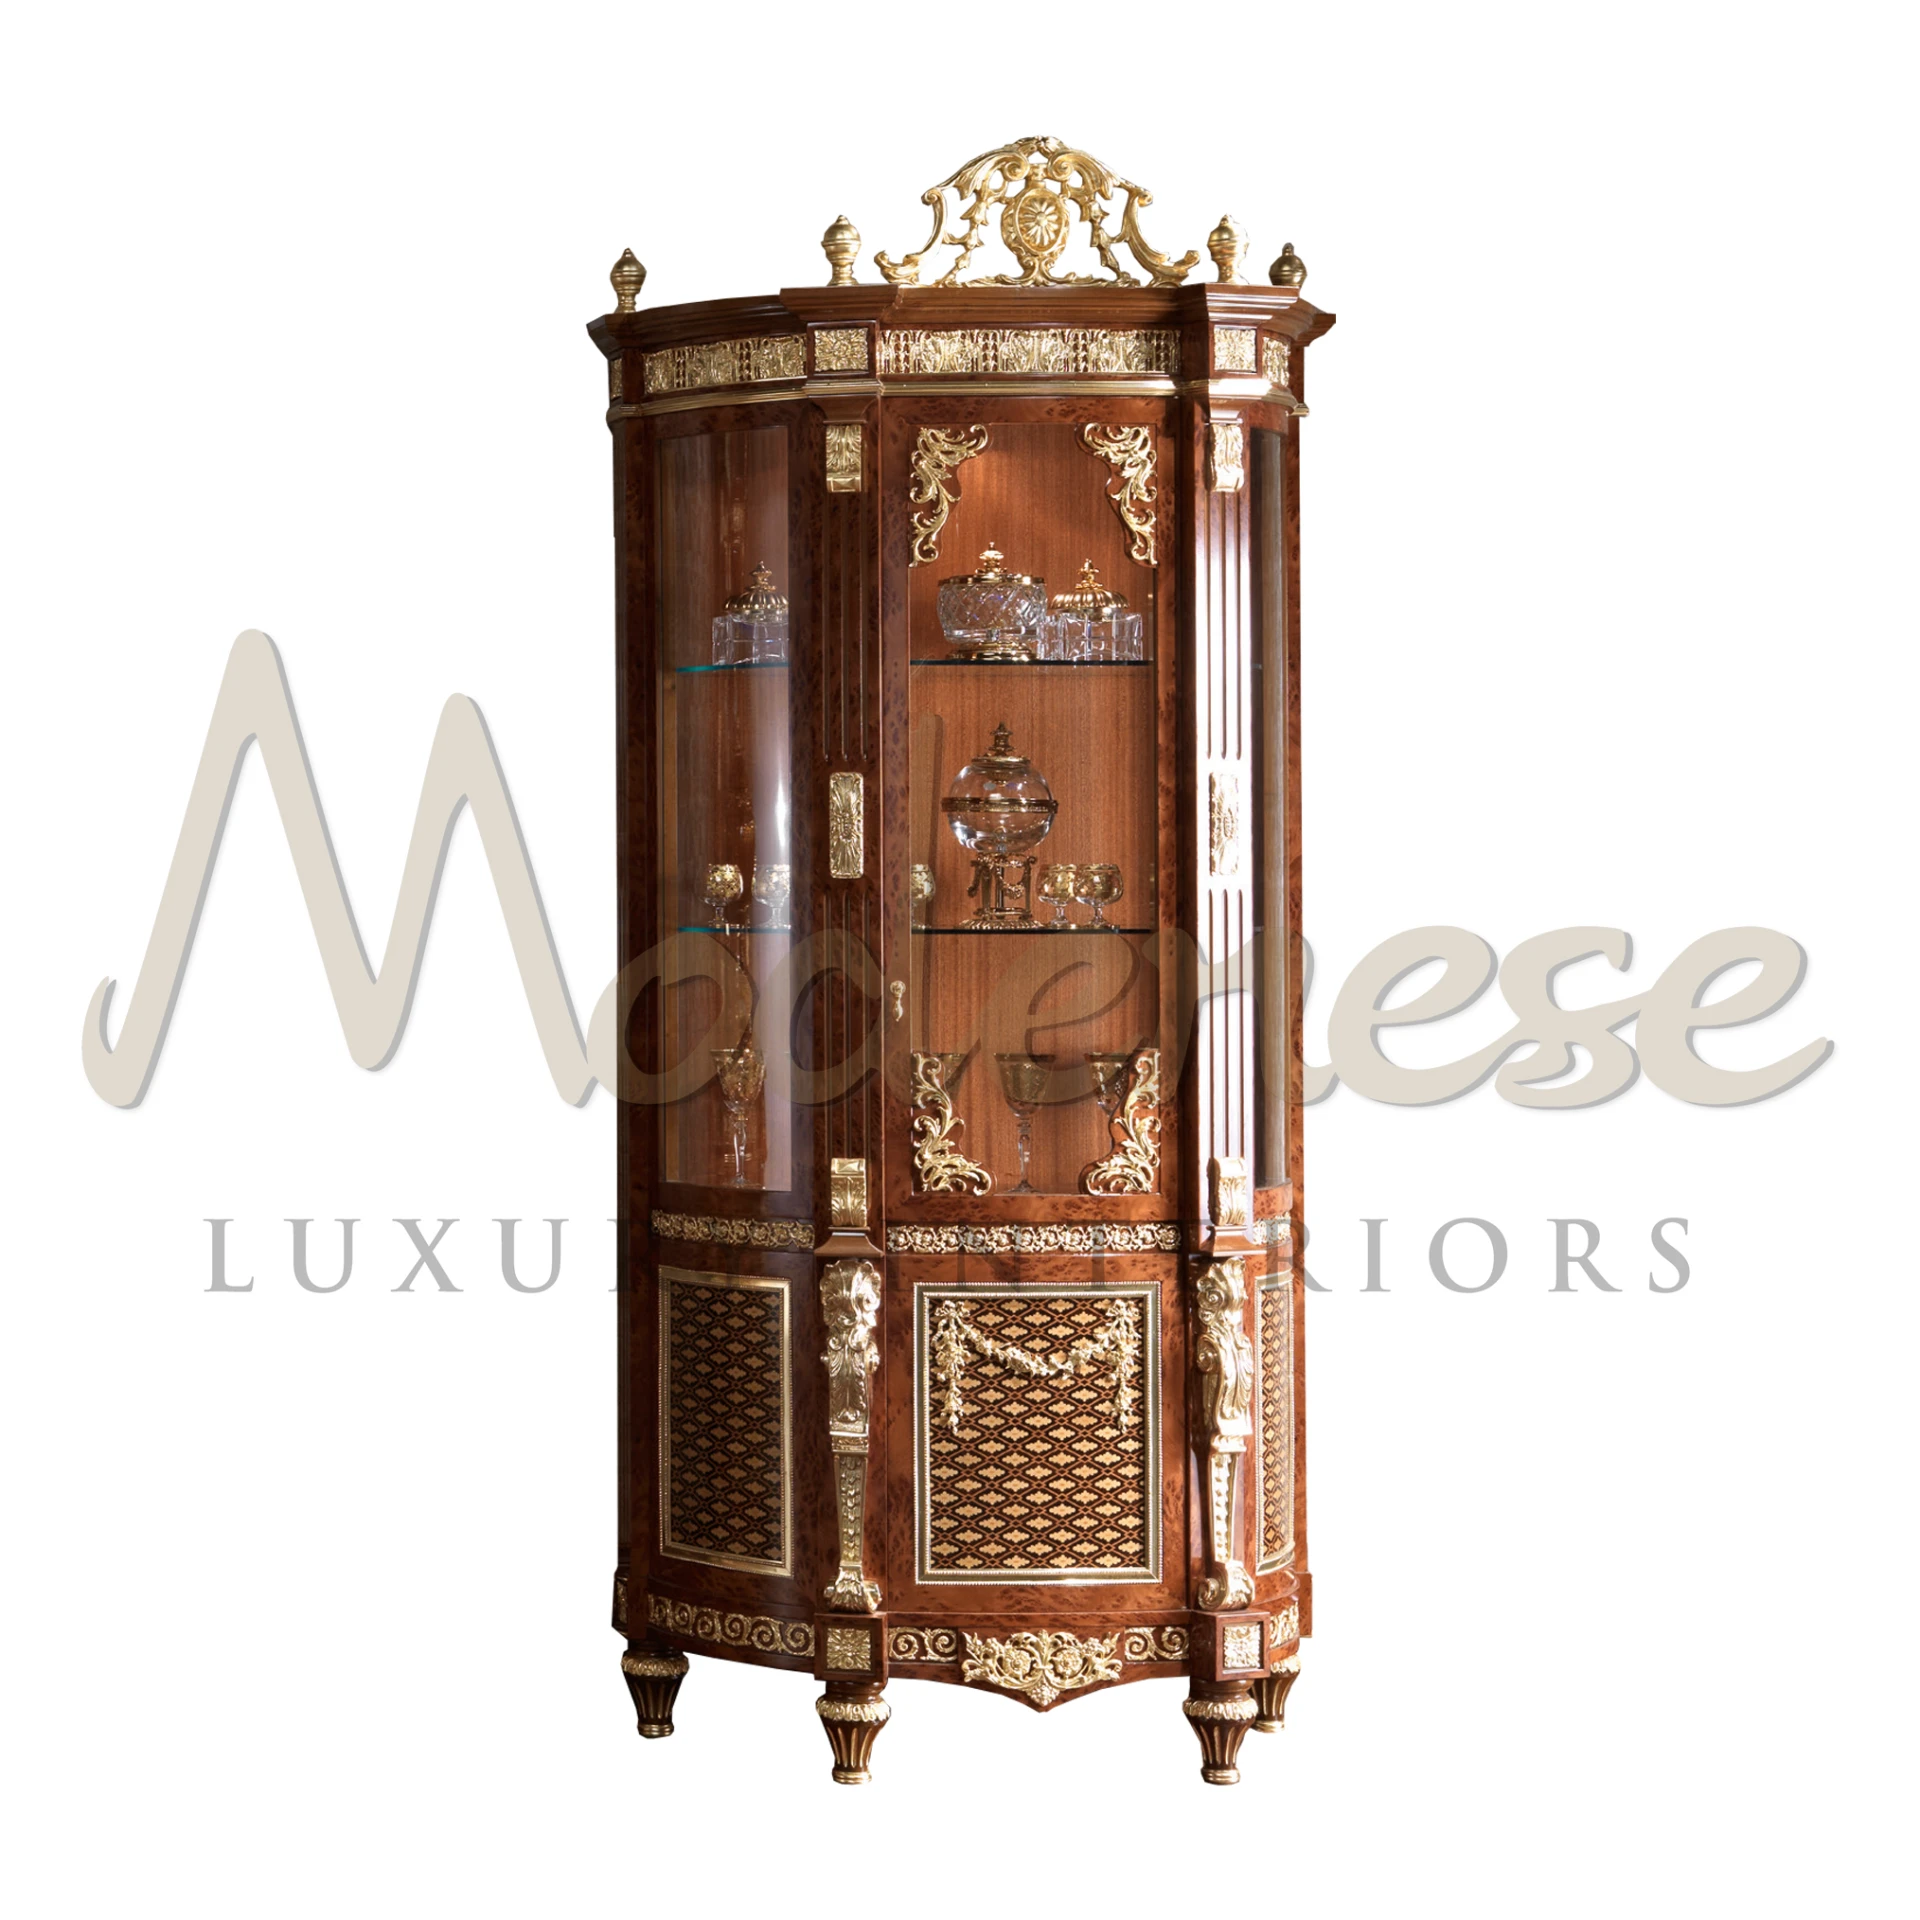 Adorn your space with this exquisite vitrine by Modenese Furniture. Expertly crafted with solid wood, intricate marquetry, and lavish golden accents.